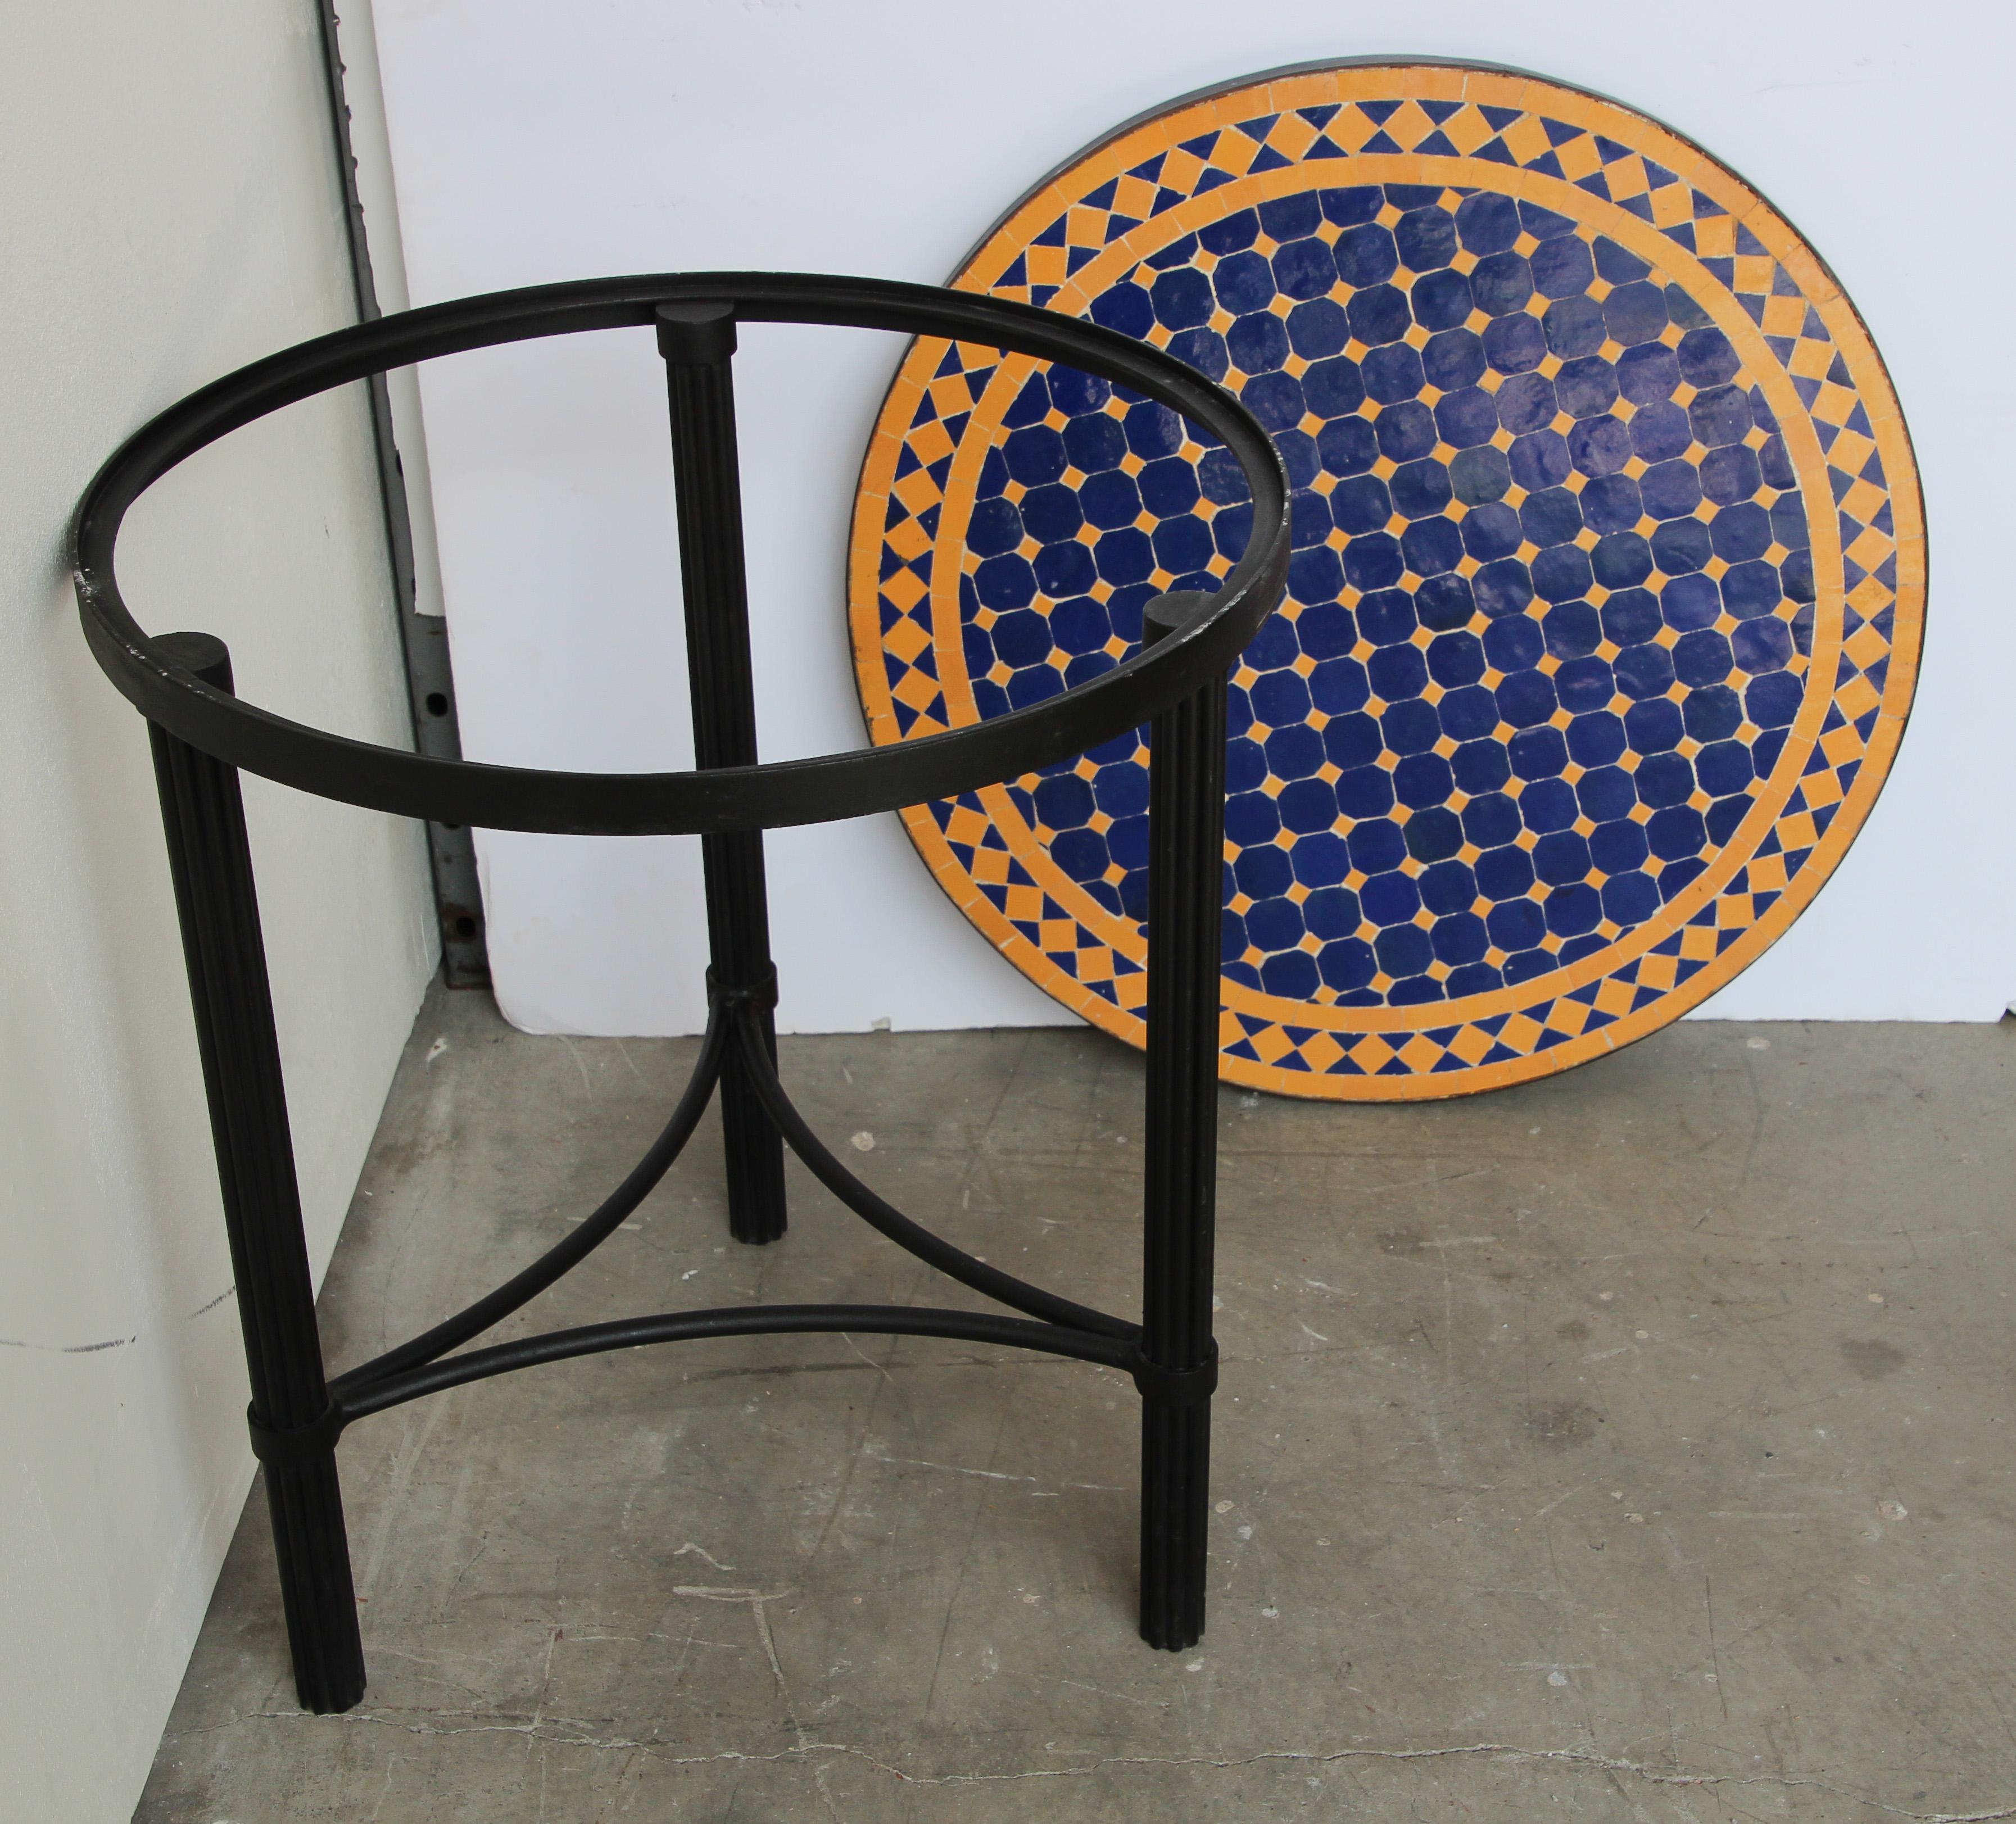 Moroccan Mosaic Tiles Cobalt Blue and Yellow Colors Side Table 6